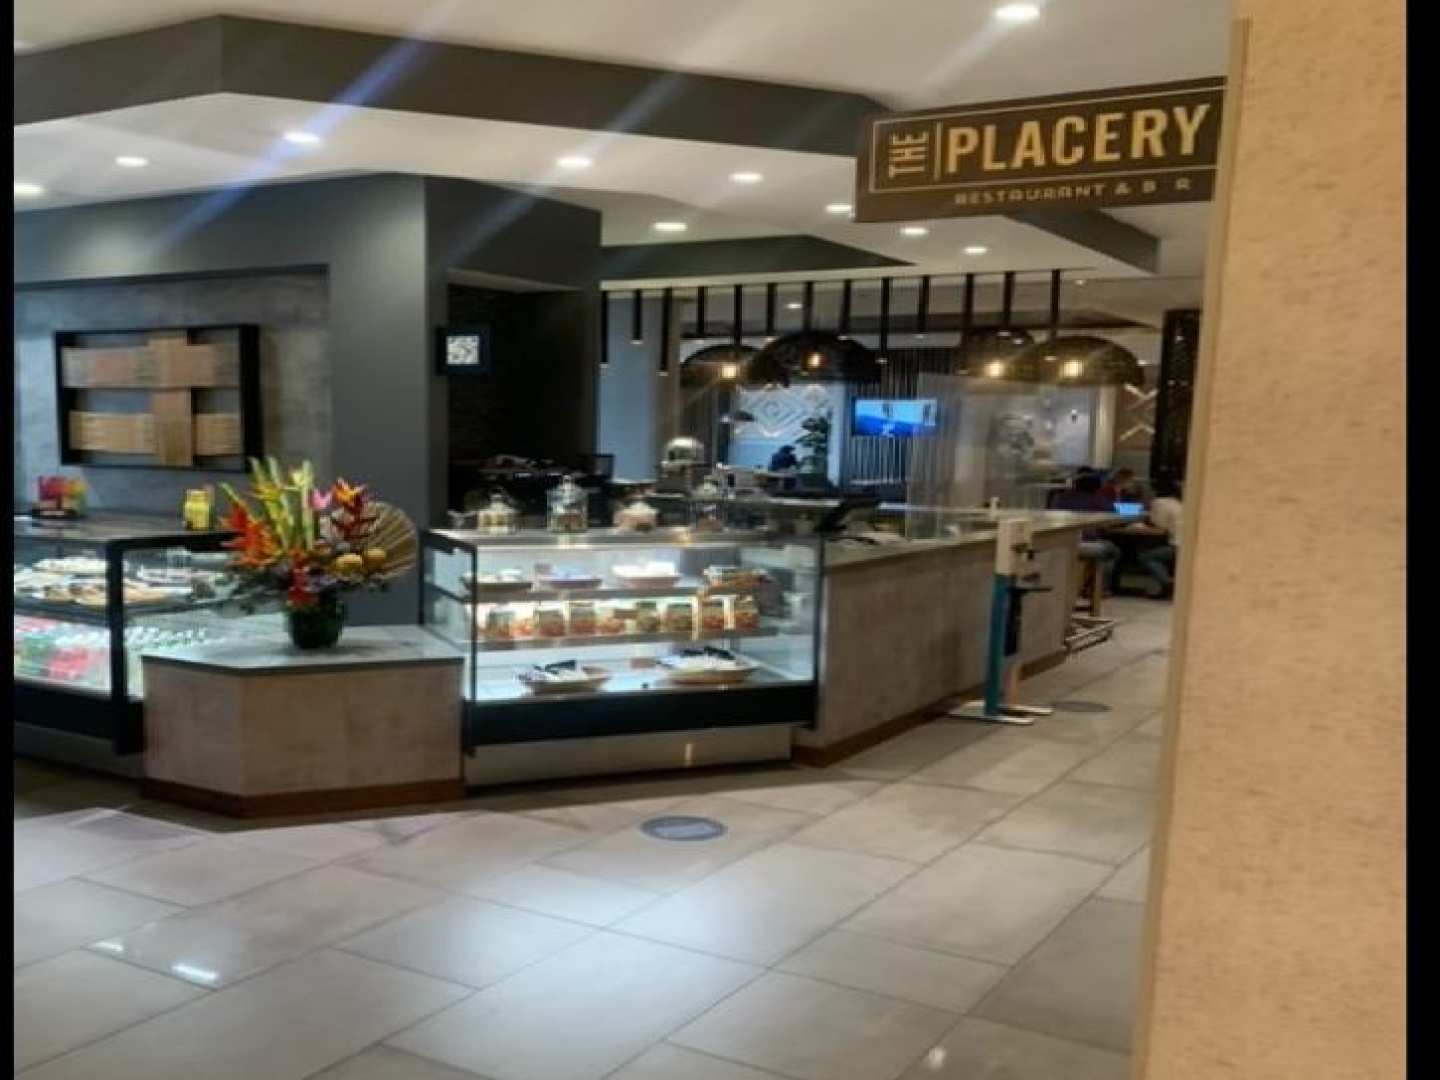 The Placery Restaurant